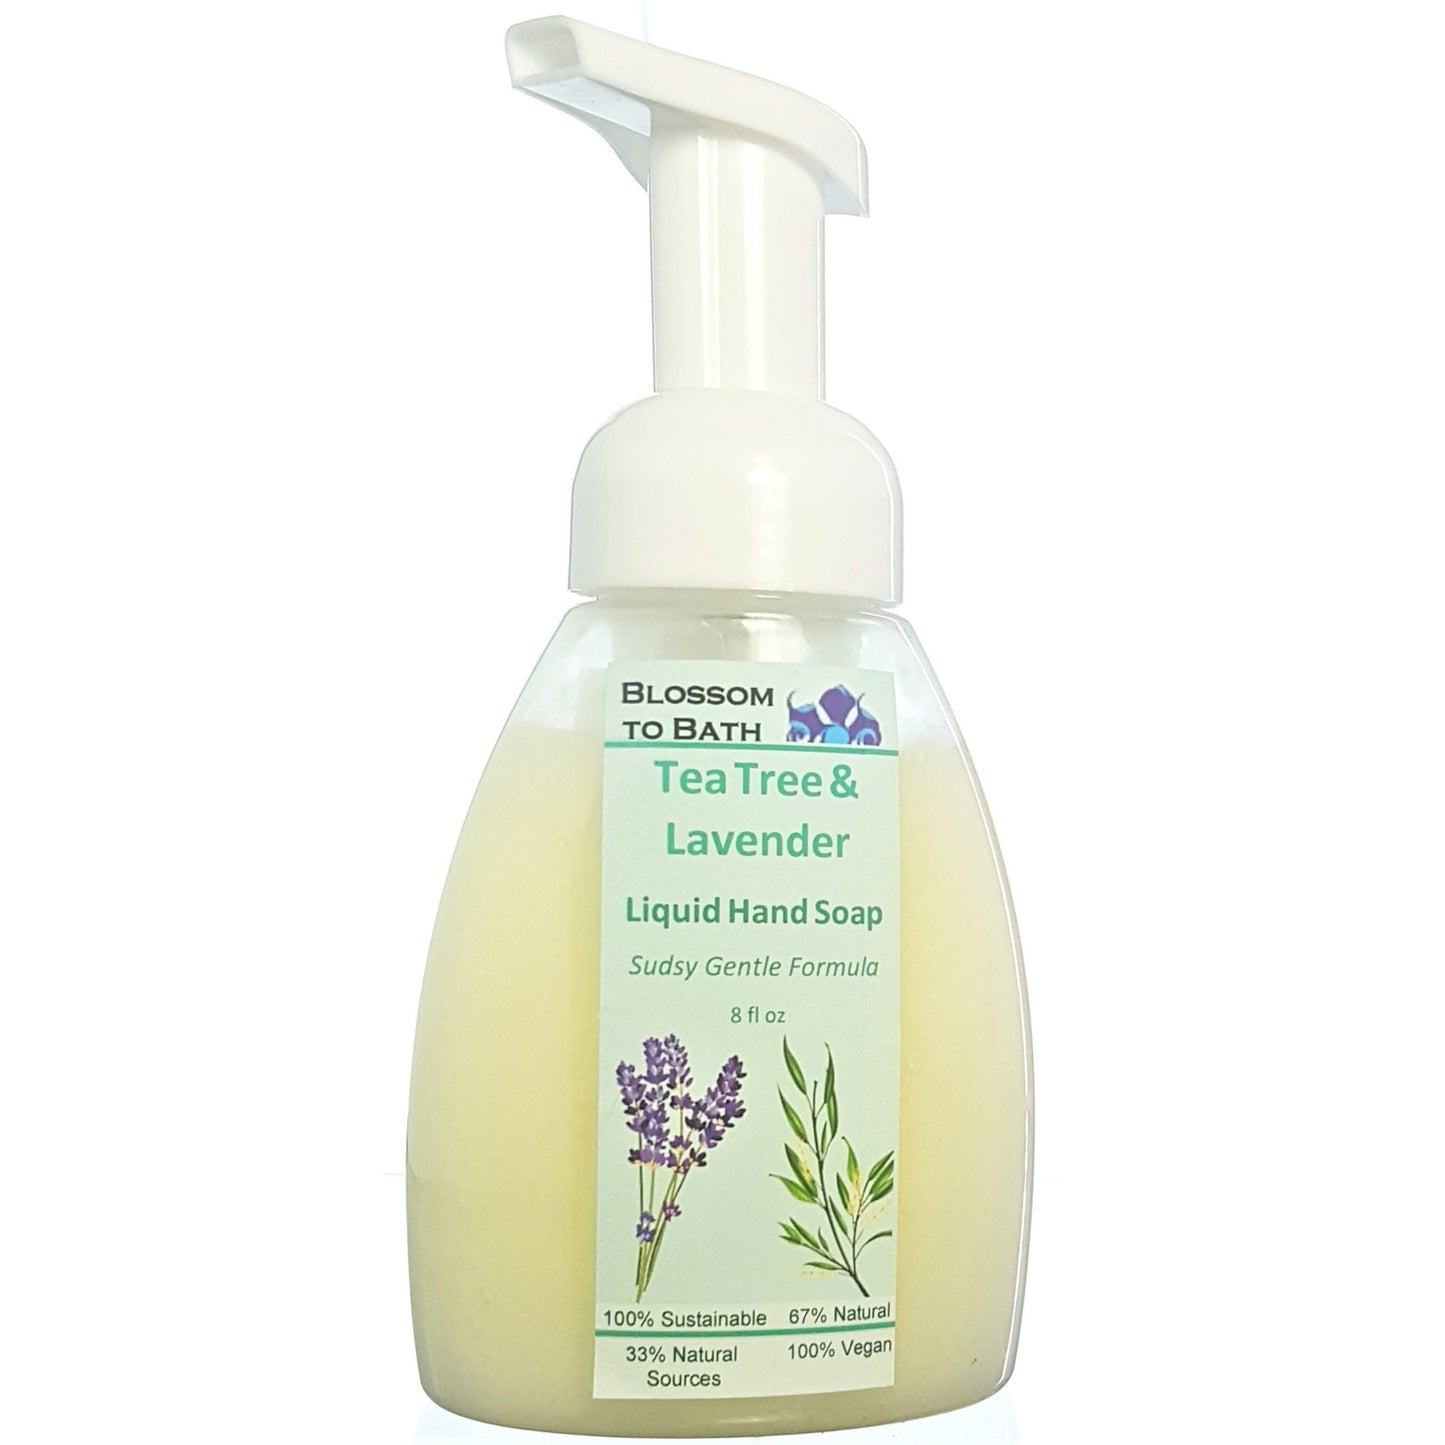 Buy Blossom to Bath Tea Tree & Lavender Liquid Hand Soap from Flowersong Soap Studio.  Get clean hands without drying in a convenient foaming pump with a luxury fragrance  Refreshing tea tree and floral lavender create a non-nonsense aura of clean and fresh.